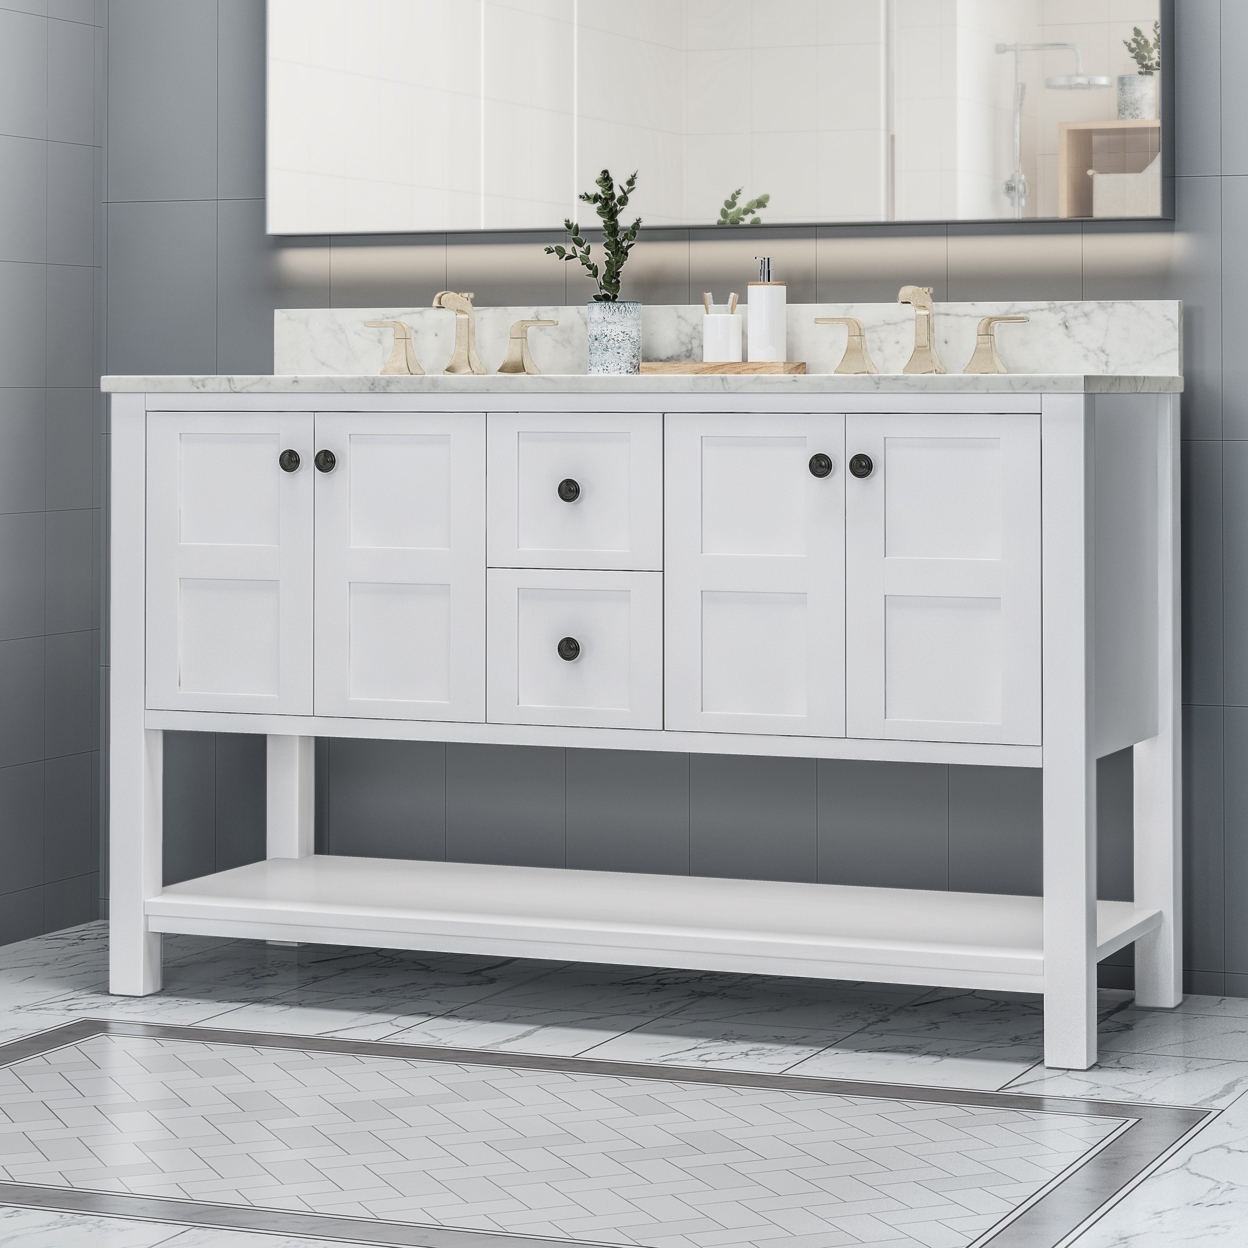 Jamison Contemporary 60 Wood Double Sink Bathroom Vanity With Marble Counter Top With Carrara White Marble - Gray